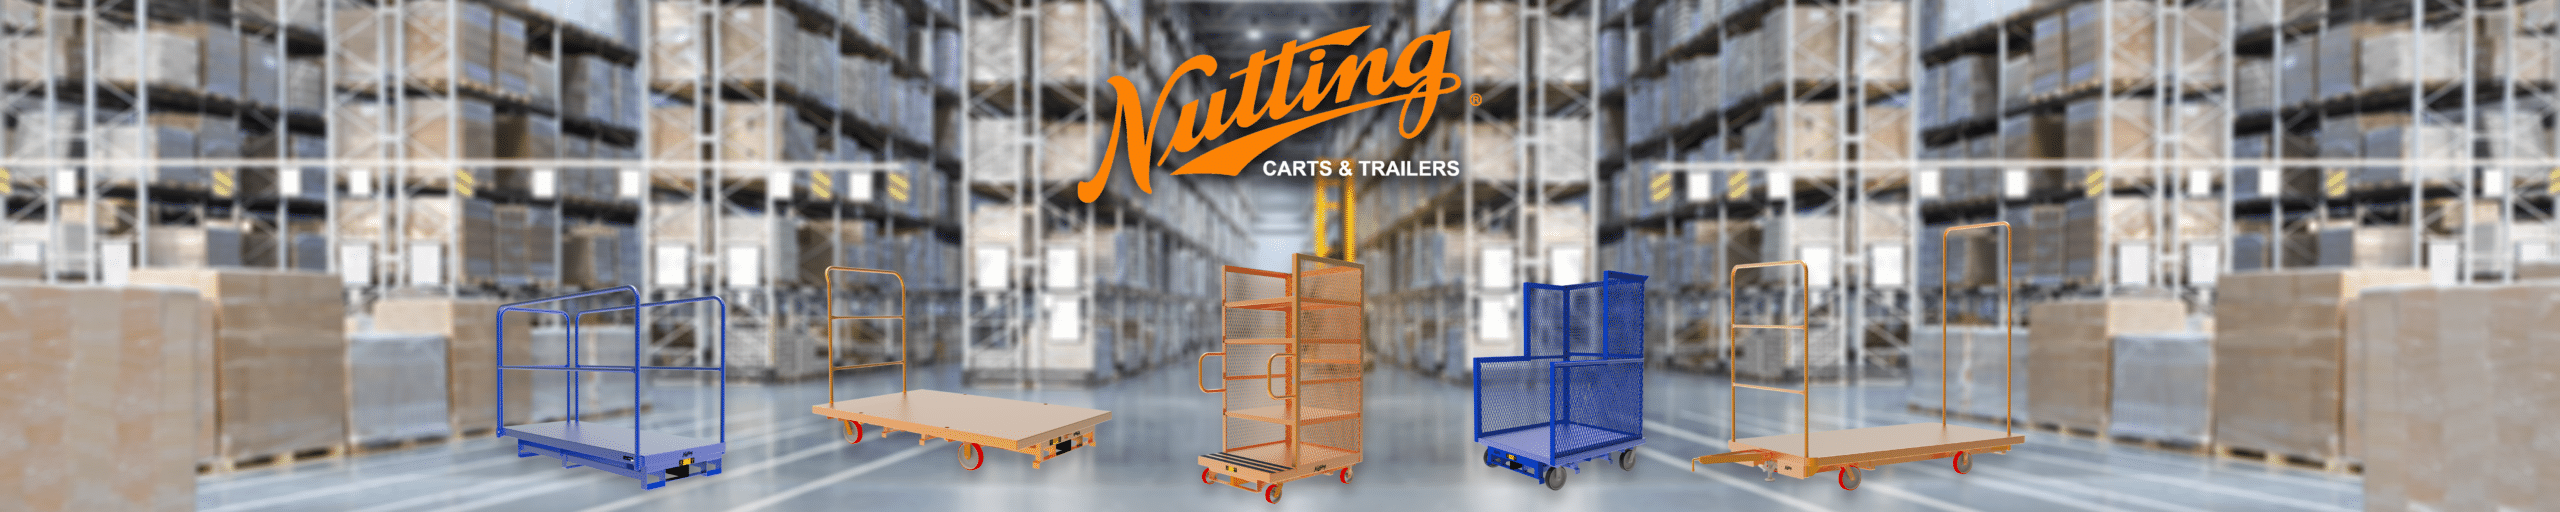 Nutting Order Picker Carts, Trailers, and Platforms in a warehouse